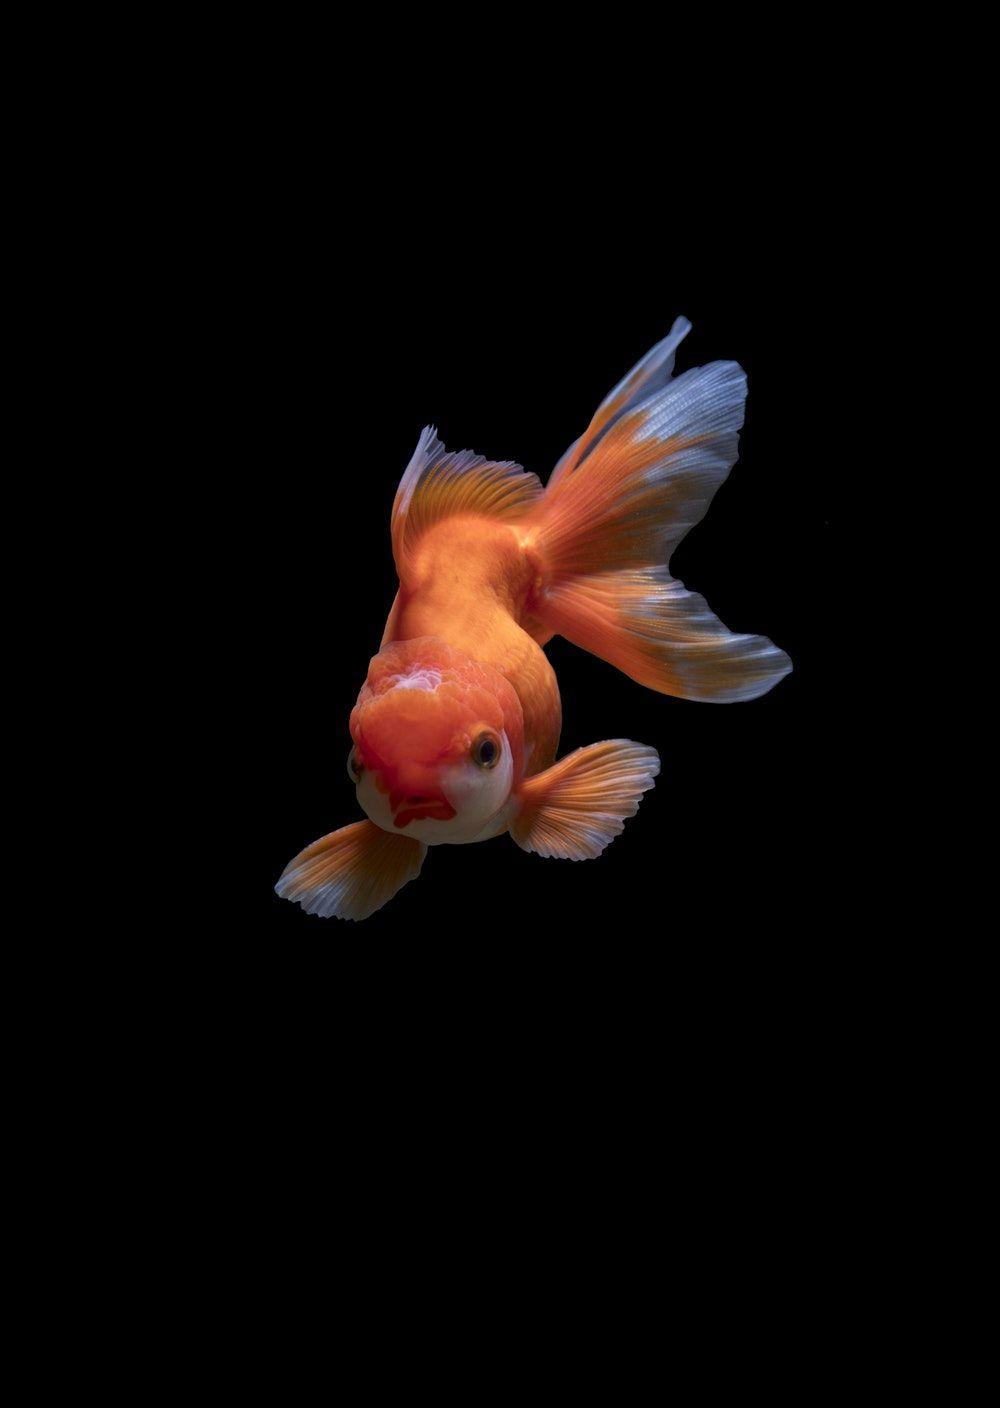 Goldfish Picture. Download Free Image